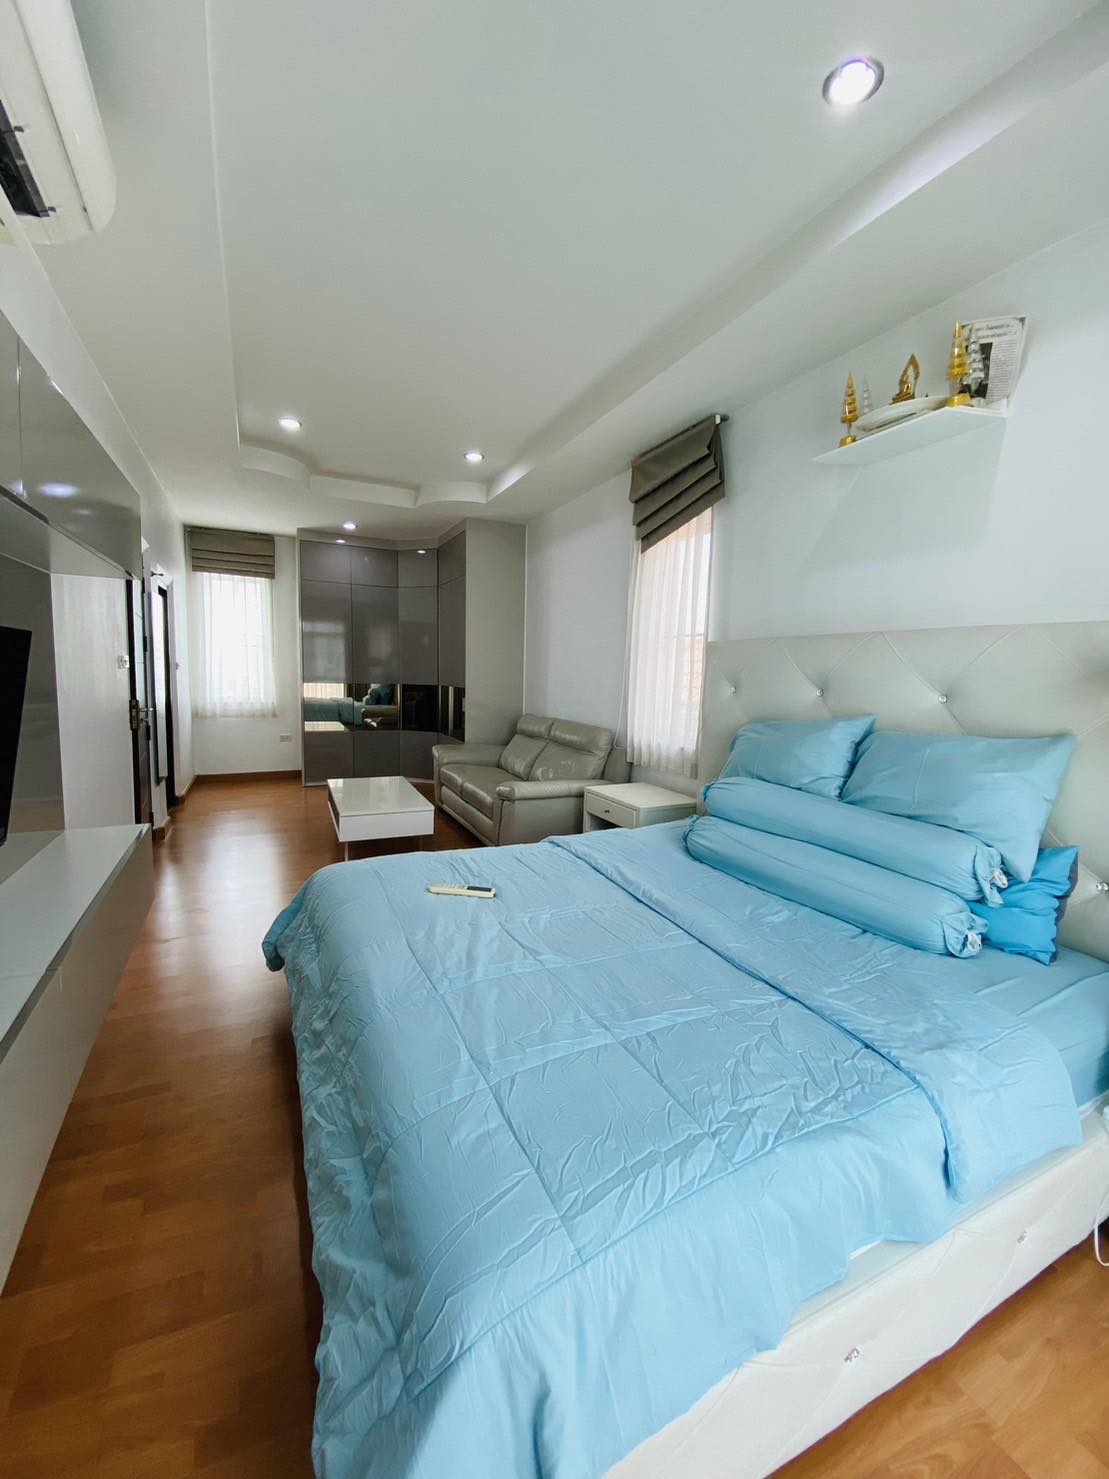 Pool Villa with 3 bedrooms in the village in Central Pattaya. Pattaya Lagoon Village (Phase 3)